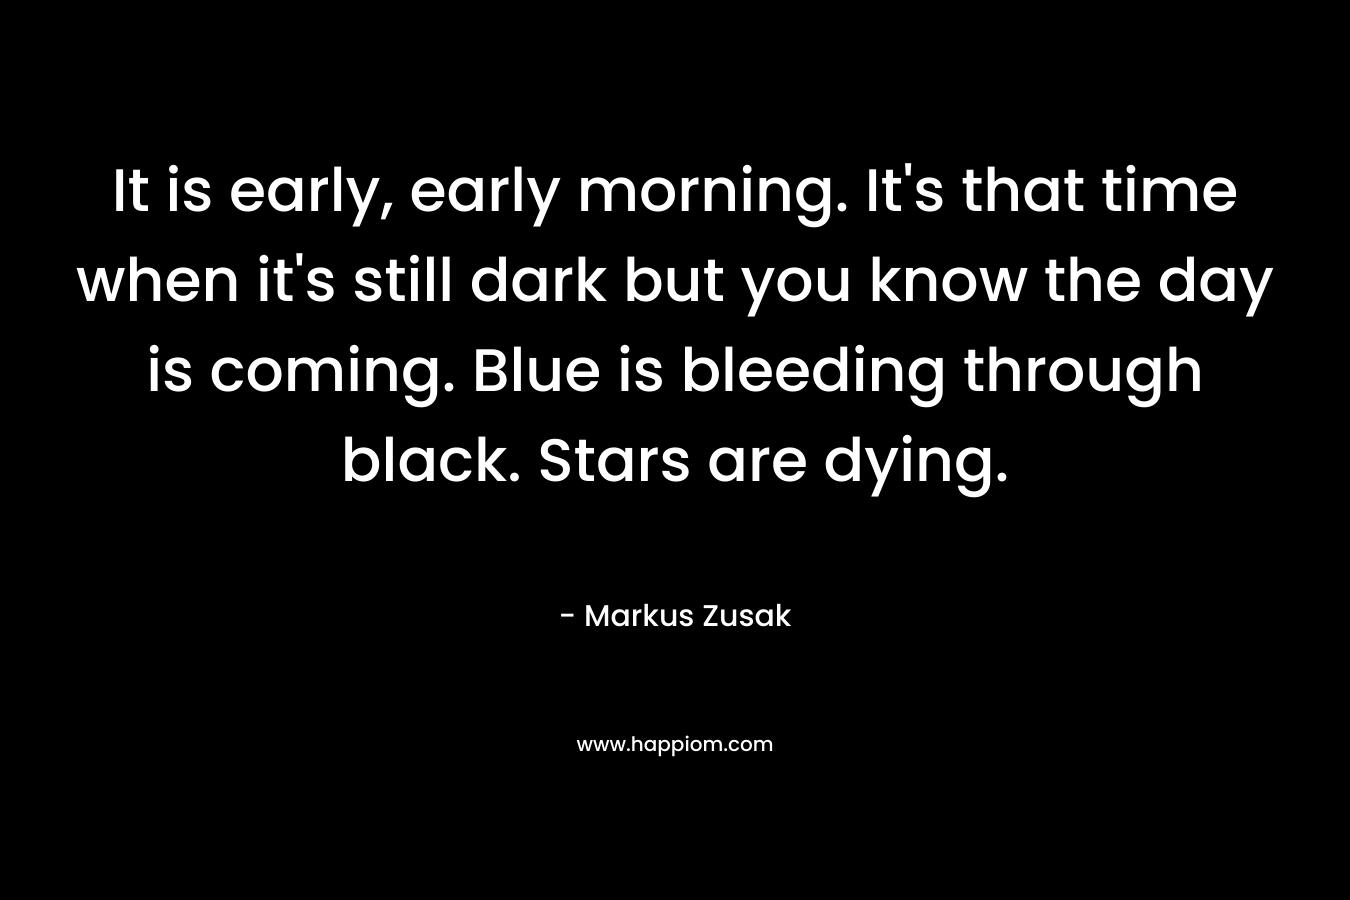 It is early, early morning. It's that time when it's still dark but you know the day is coming. Blue is bleeding through black. Stars are dying.